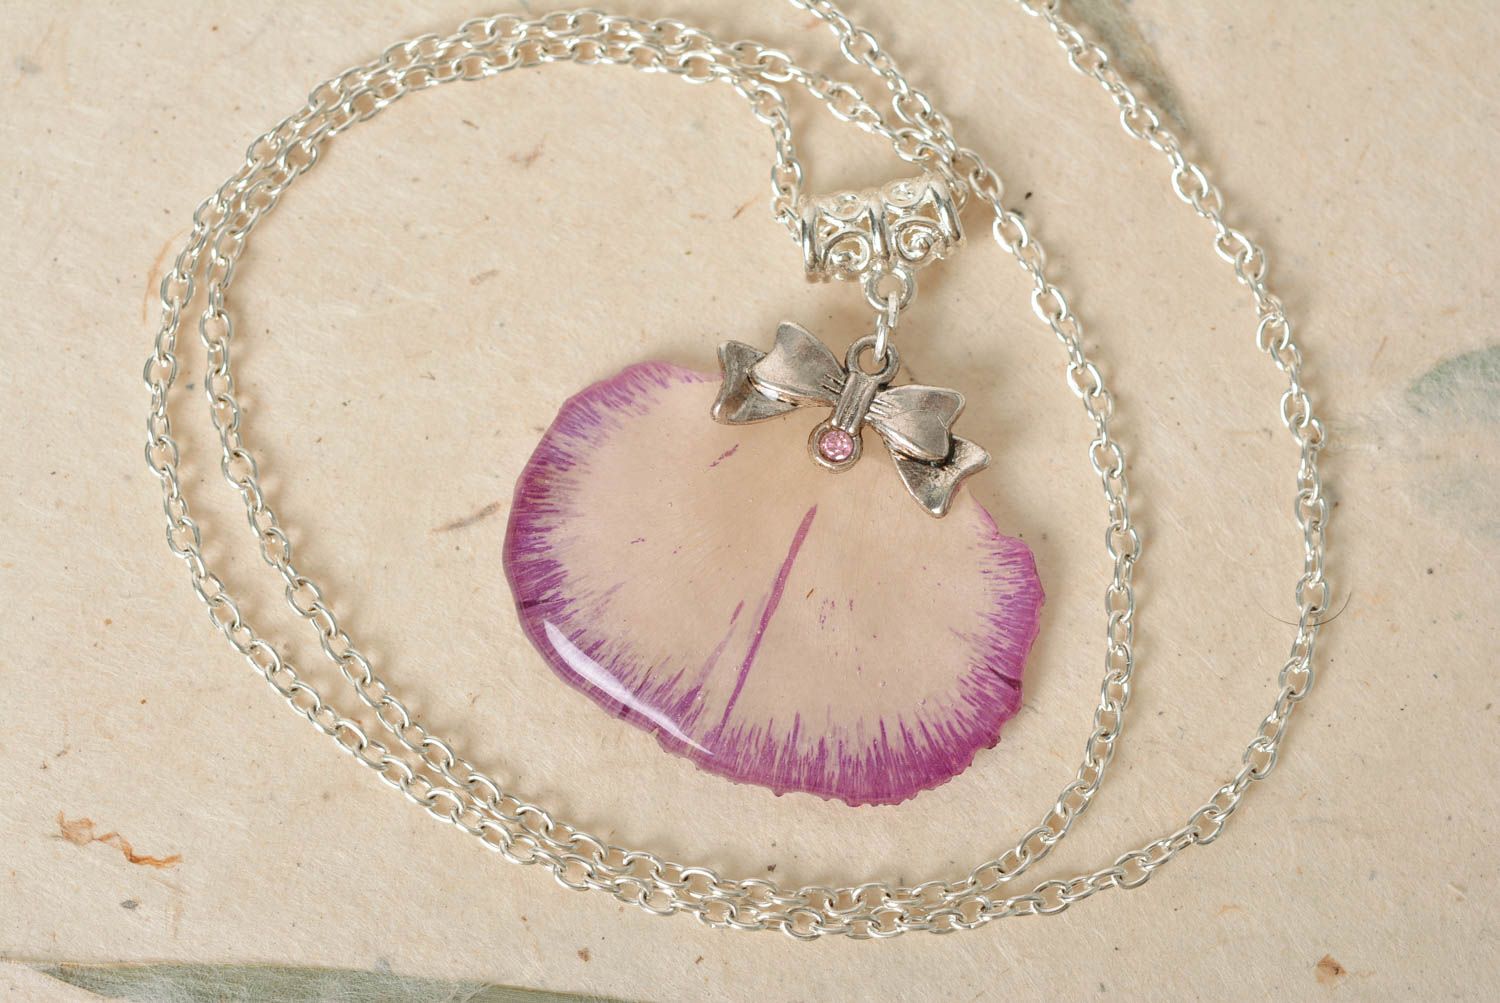 Handmade gentle pendant necklace with dried flowers and epoxy coating on chain photo 1